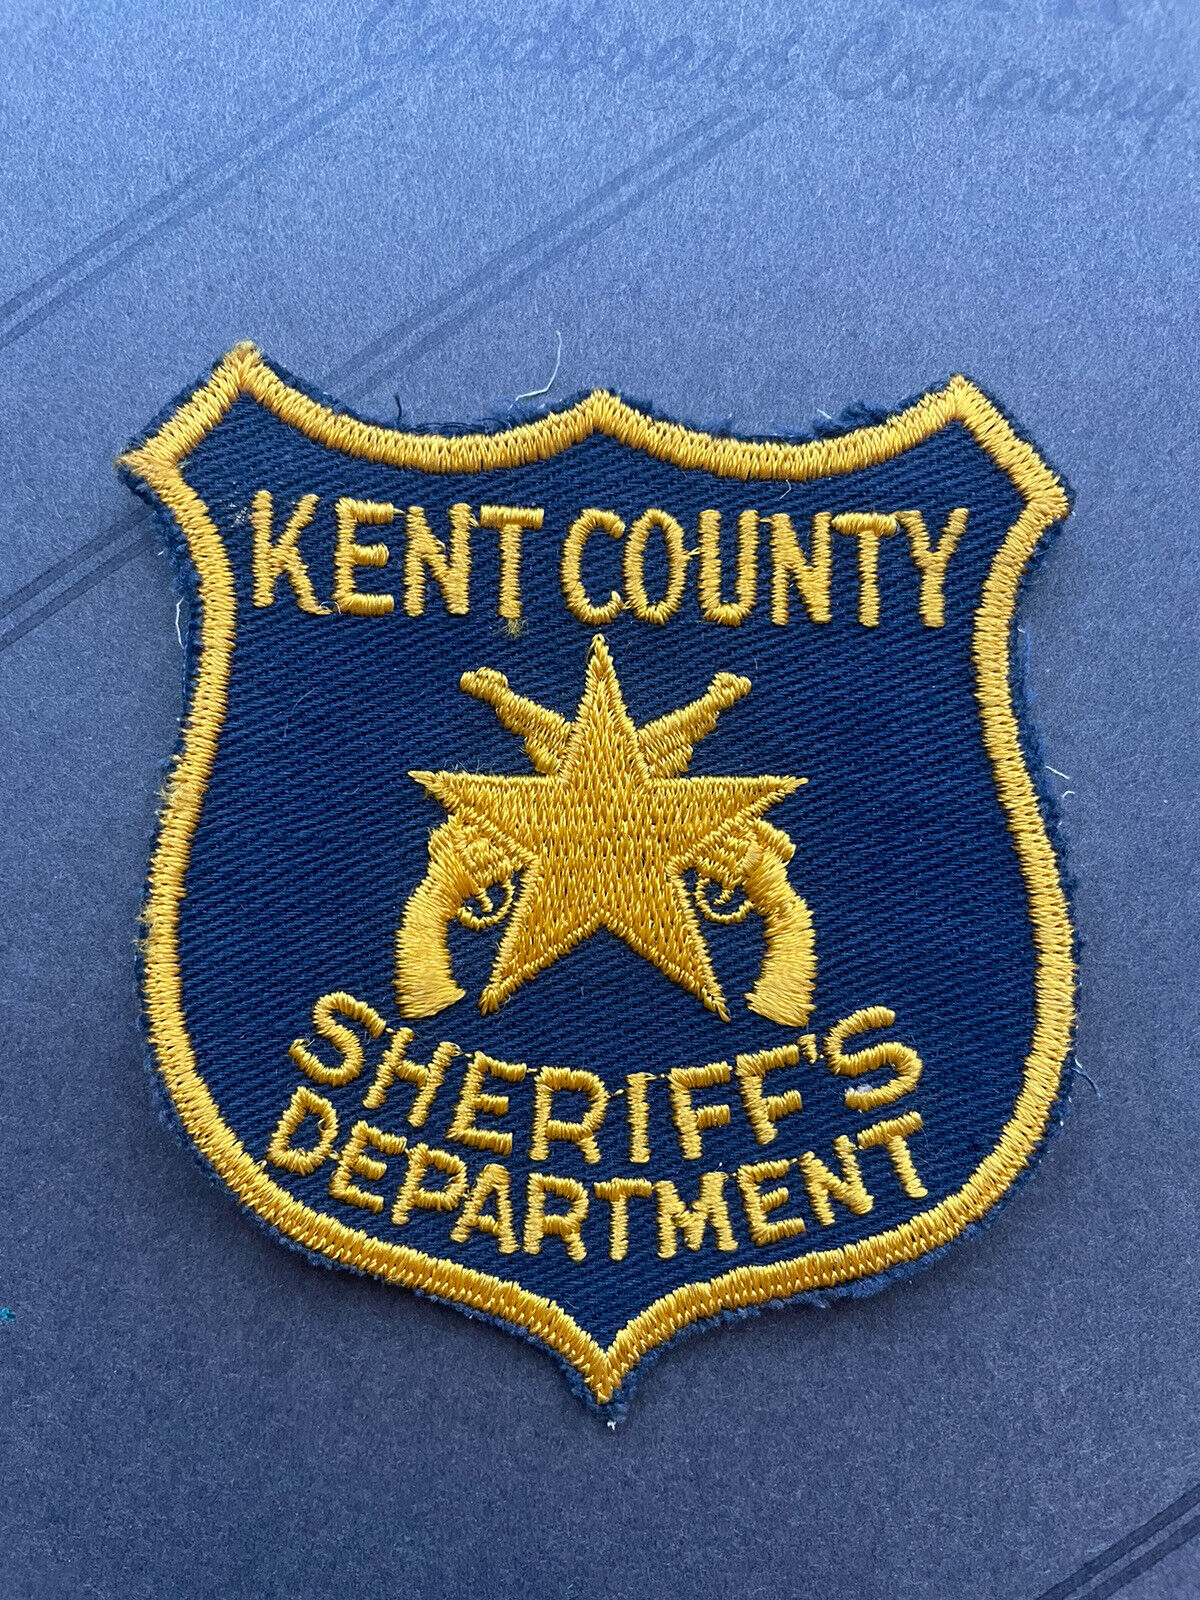 Very Old Kent County Michigan Sheriff Police Patch Mi Crossed Guns